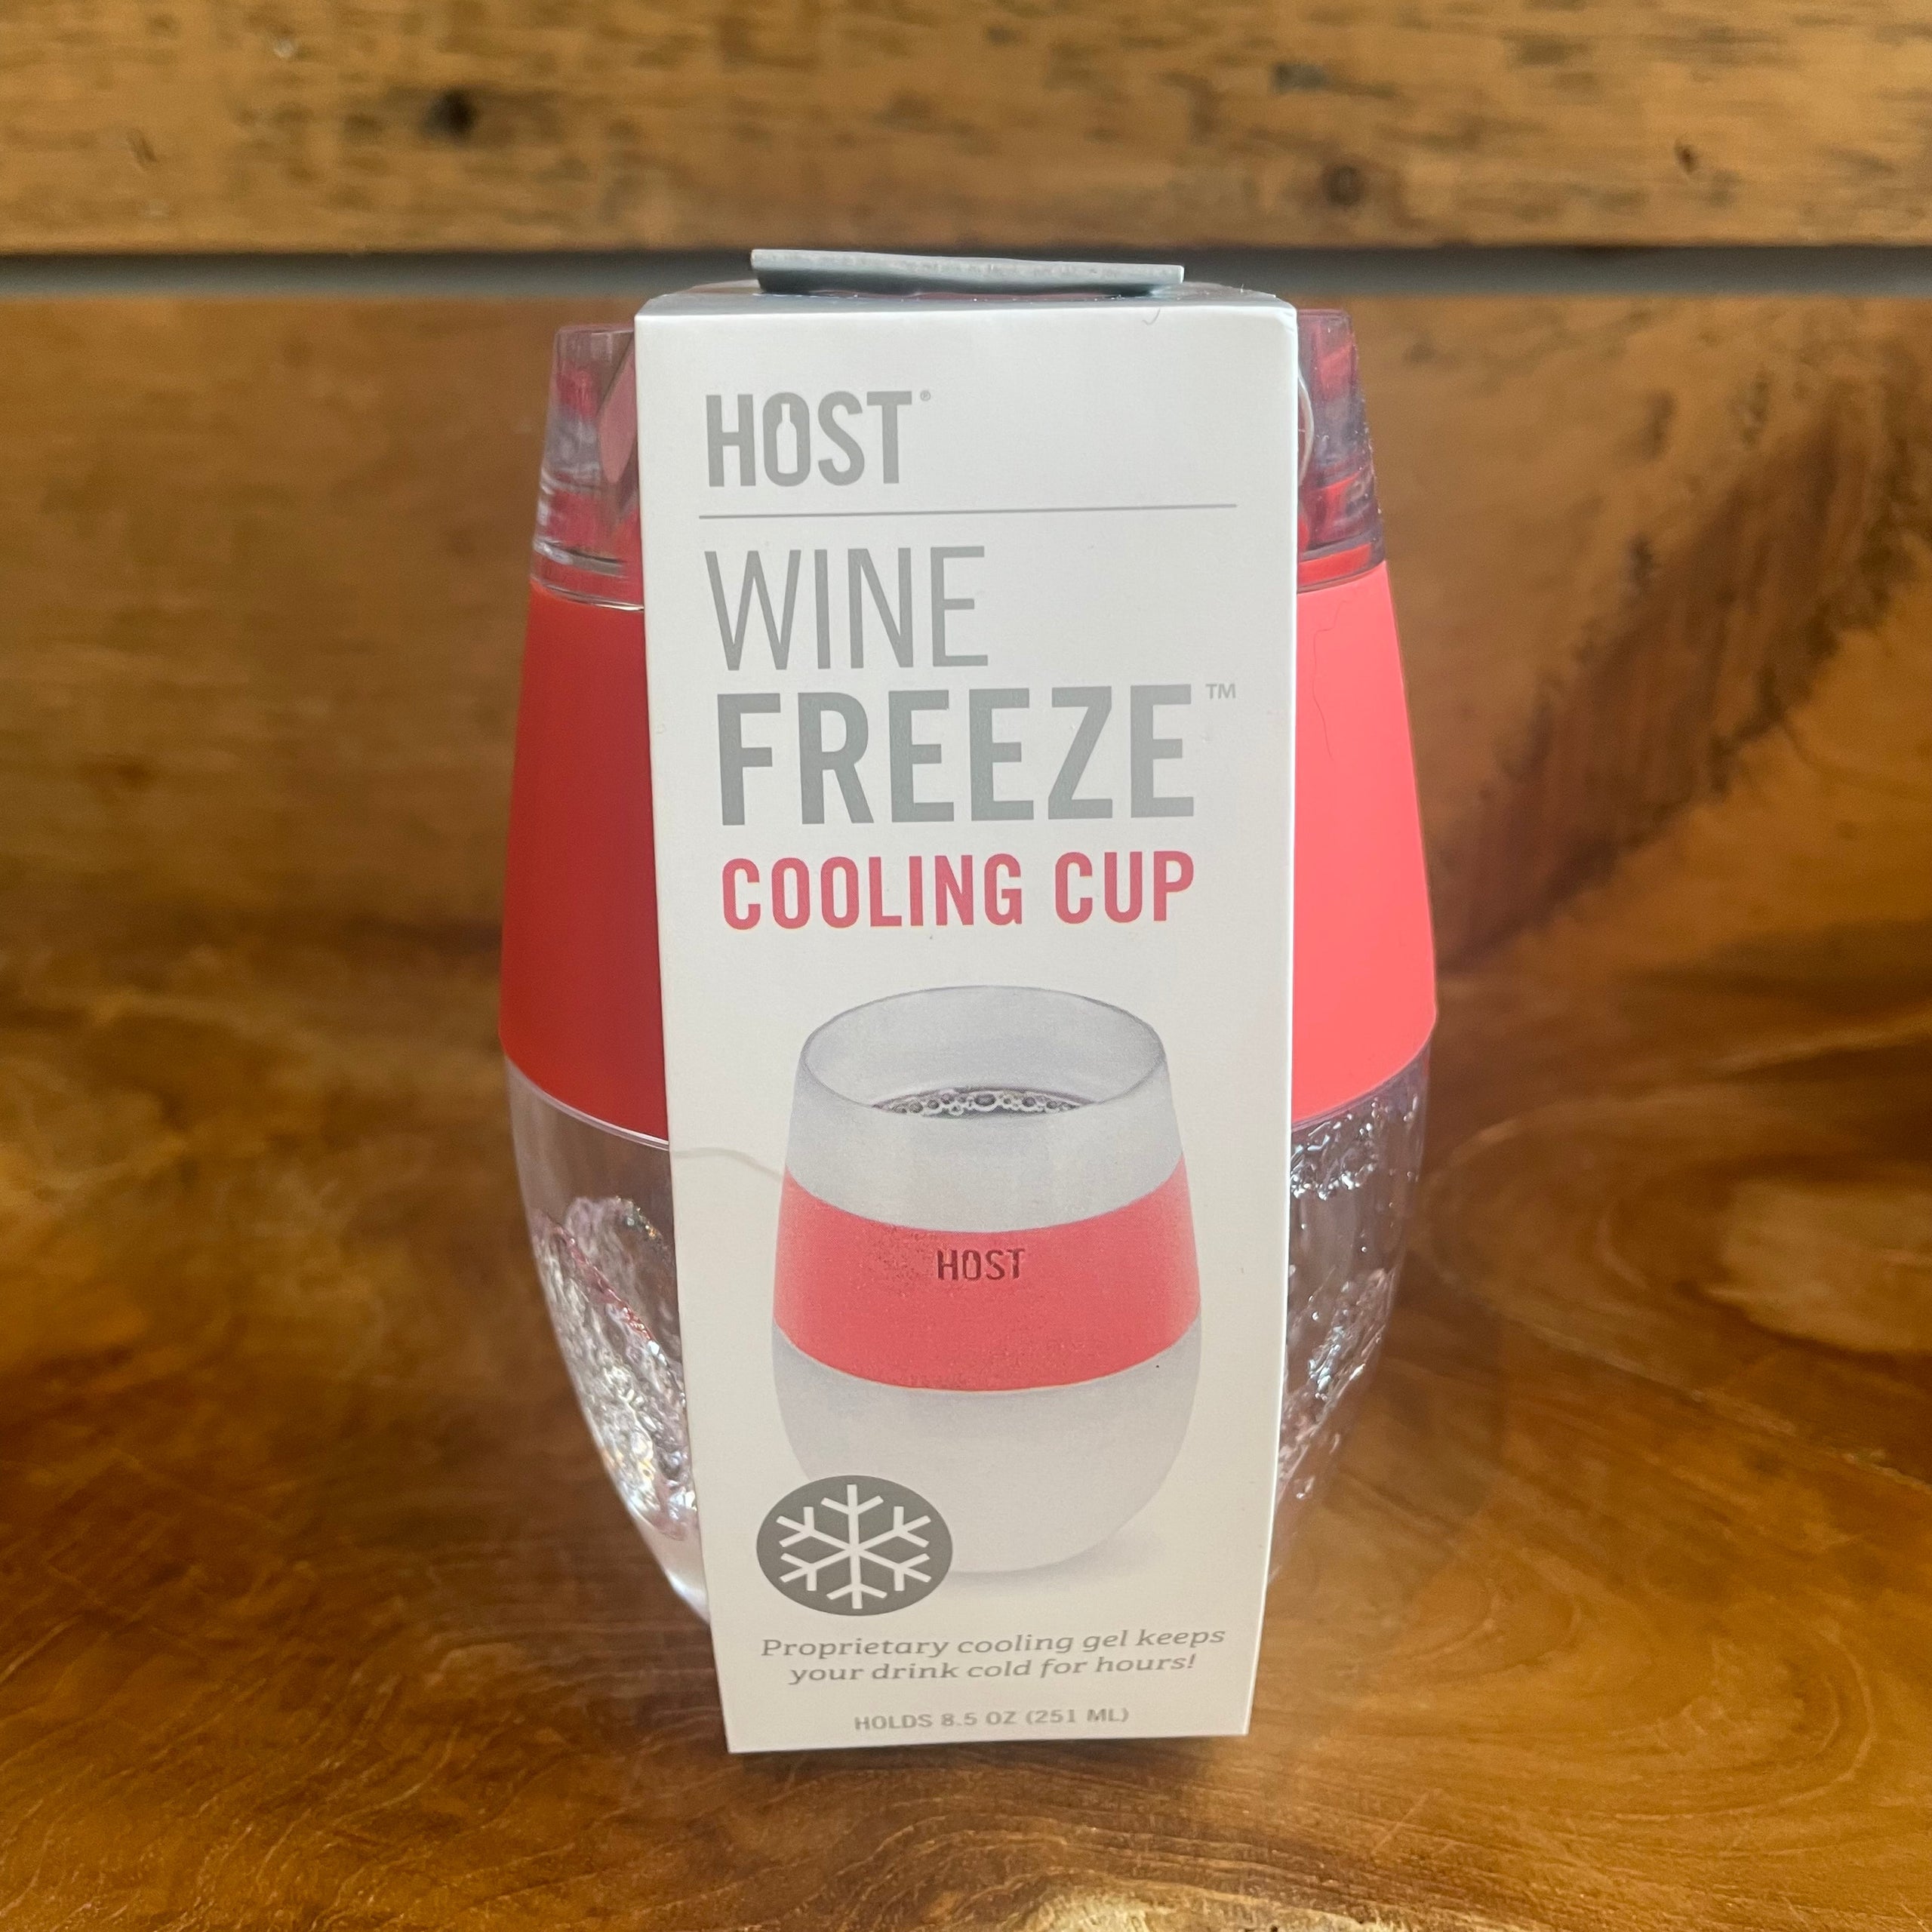 Host - Freeze Wine Cooling Cup - Coral